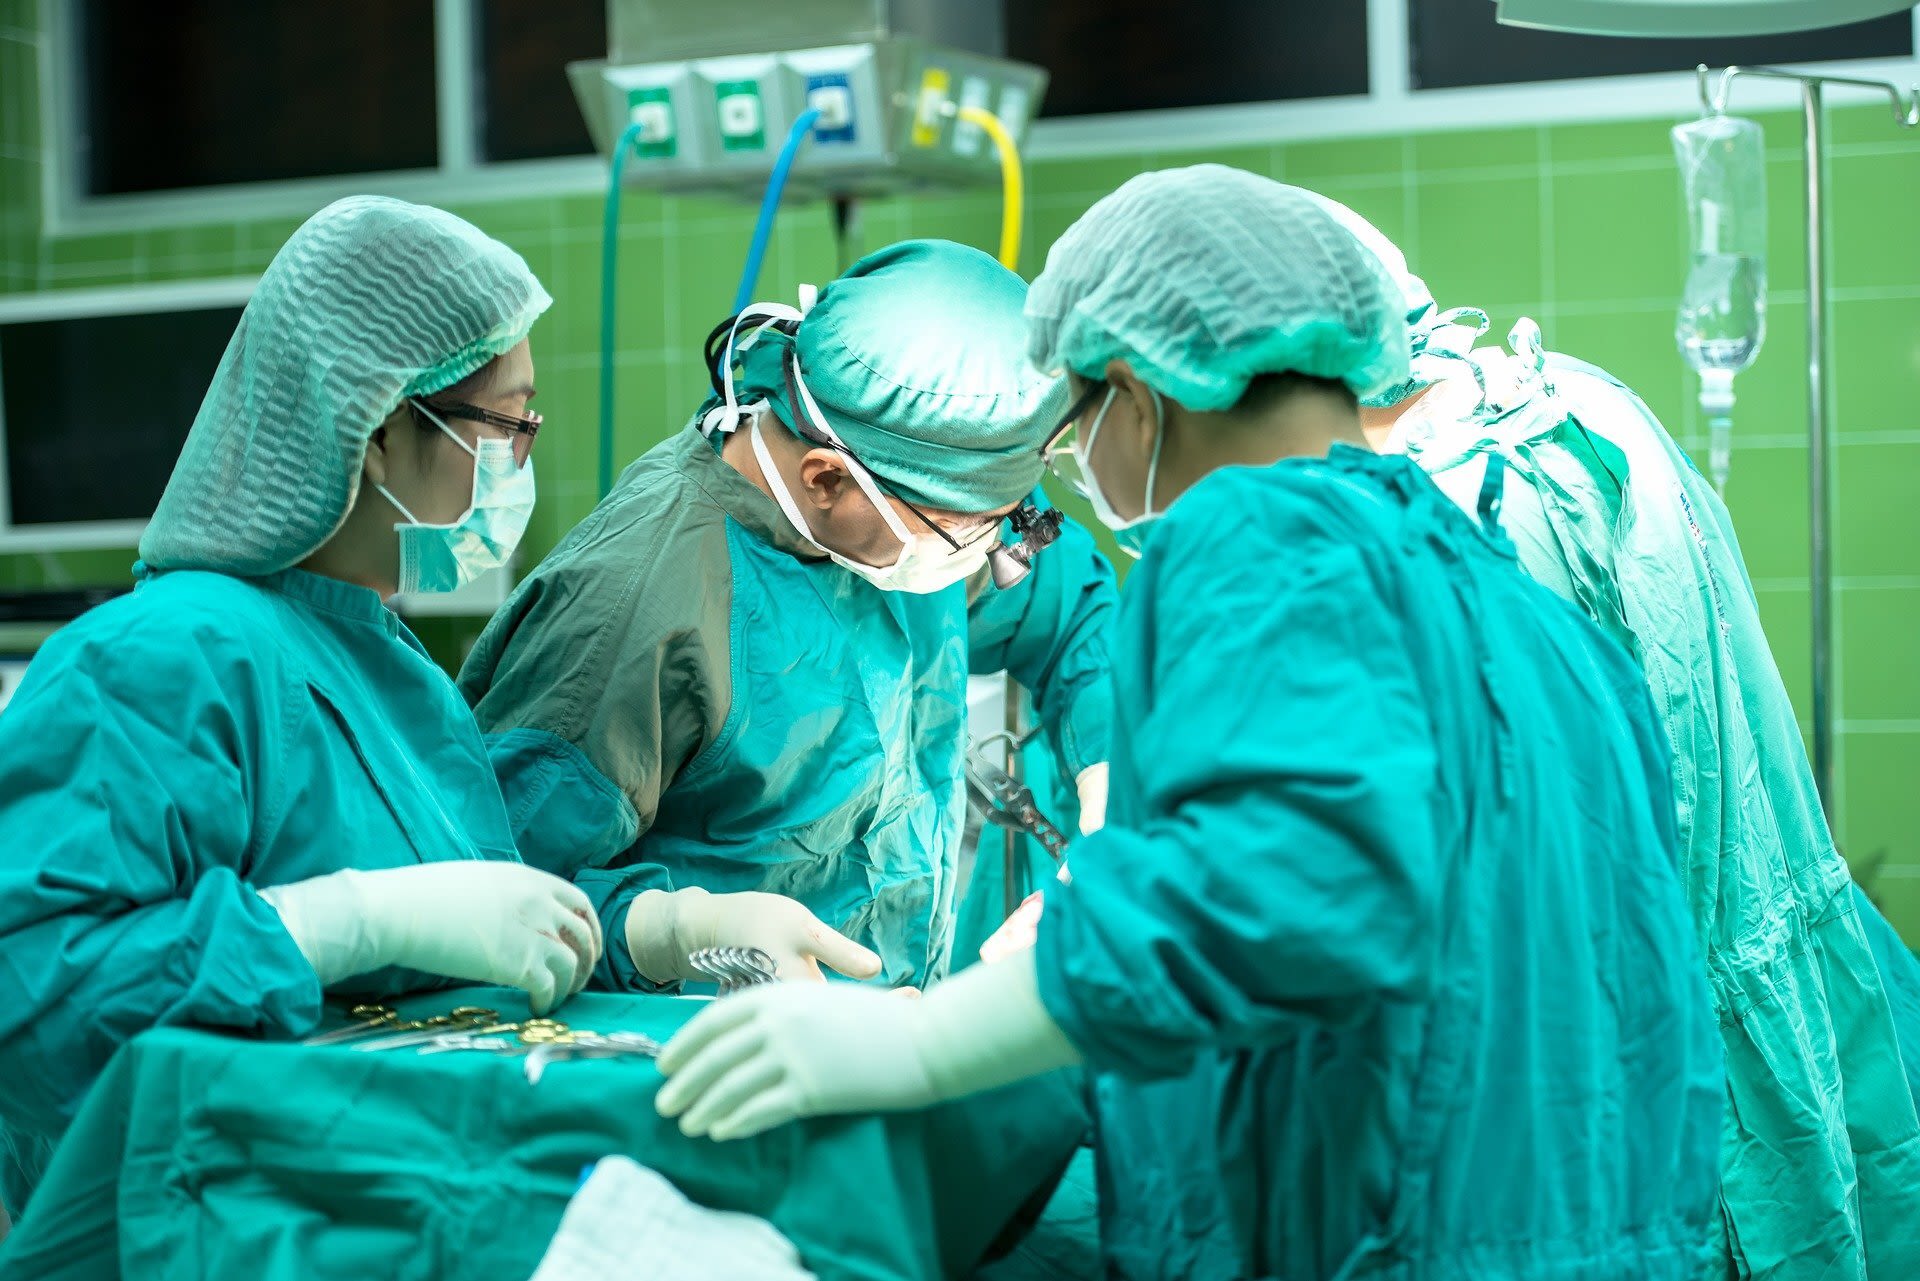 Around 160,000 UK joint replacement surgeries missed during COVID-19 pandemic, study finds